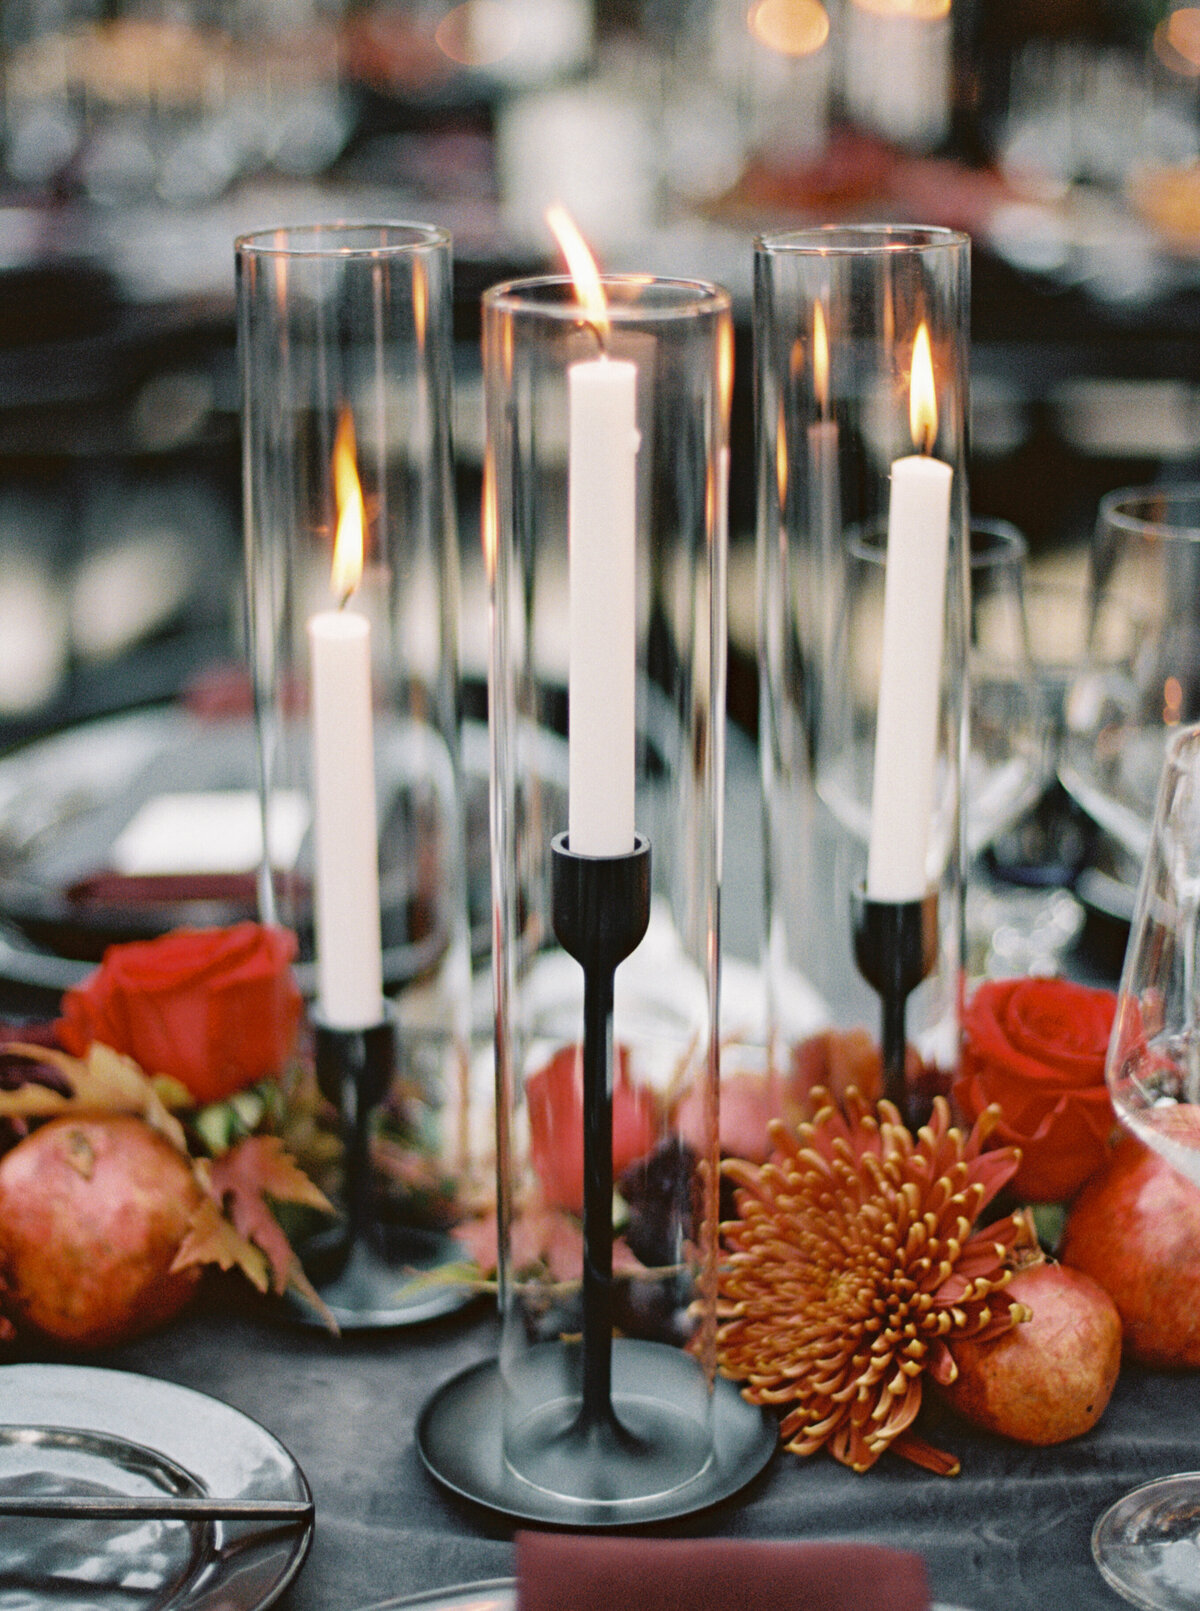 Candles and Decor on a Table at a Wedding